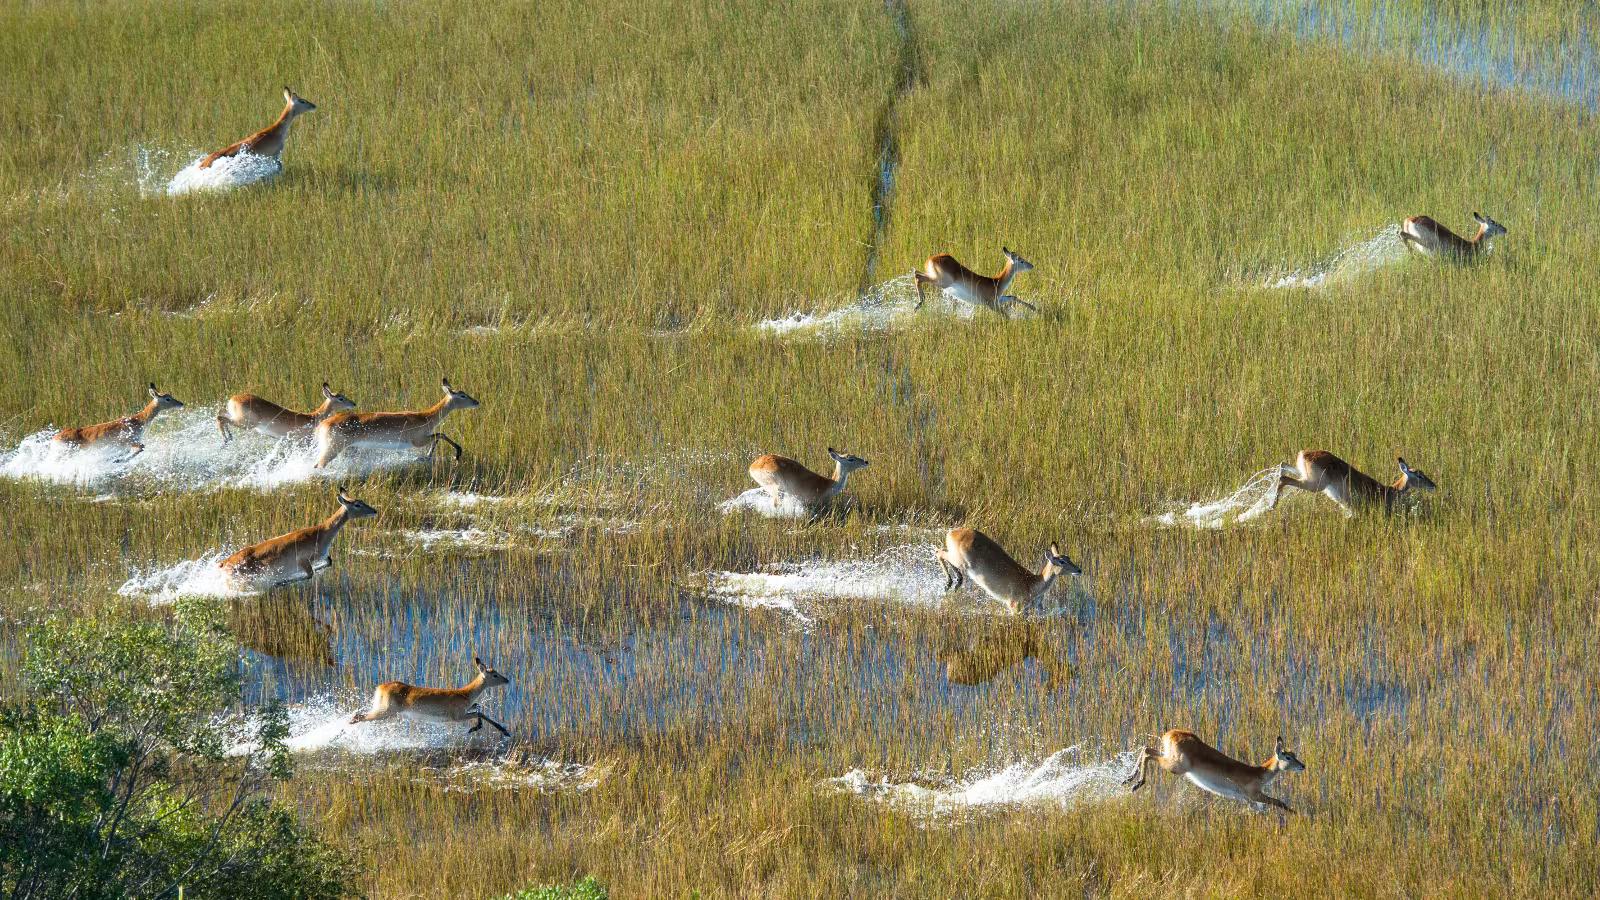 A herd of red lechwe antelope bound across the flooded grasslands of the delta © Radu Zaciu / Getty Images / Moment RF